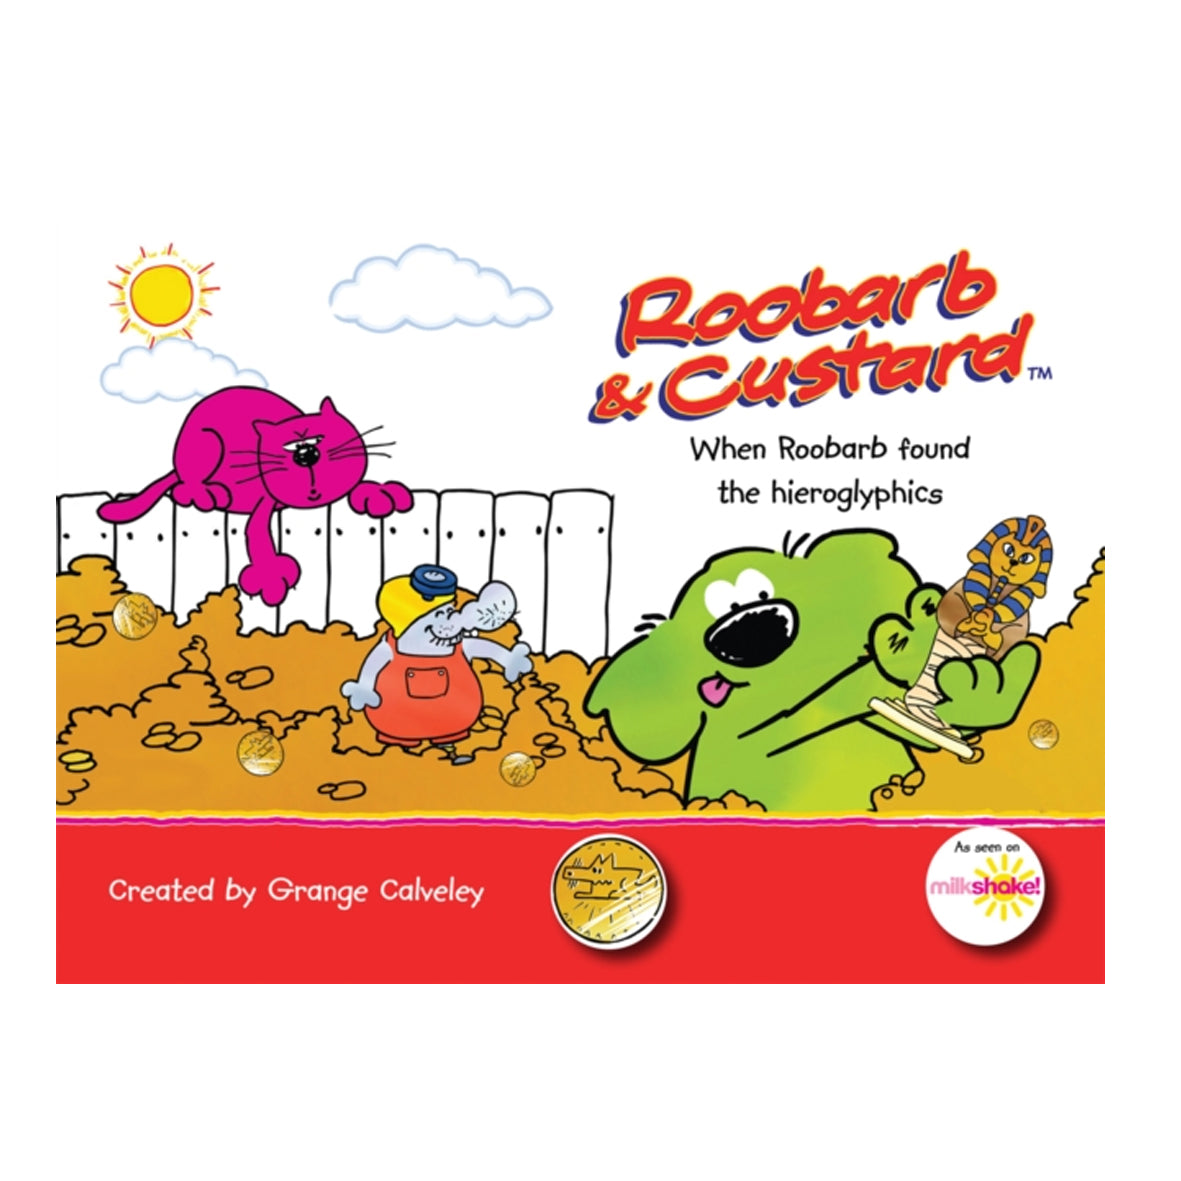 Book - Roobarb & Custard When Roobarb found the hieroglyphics